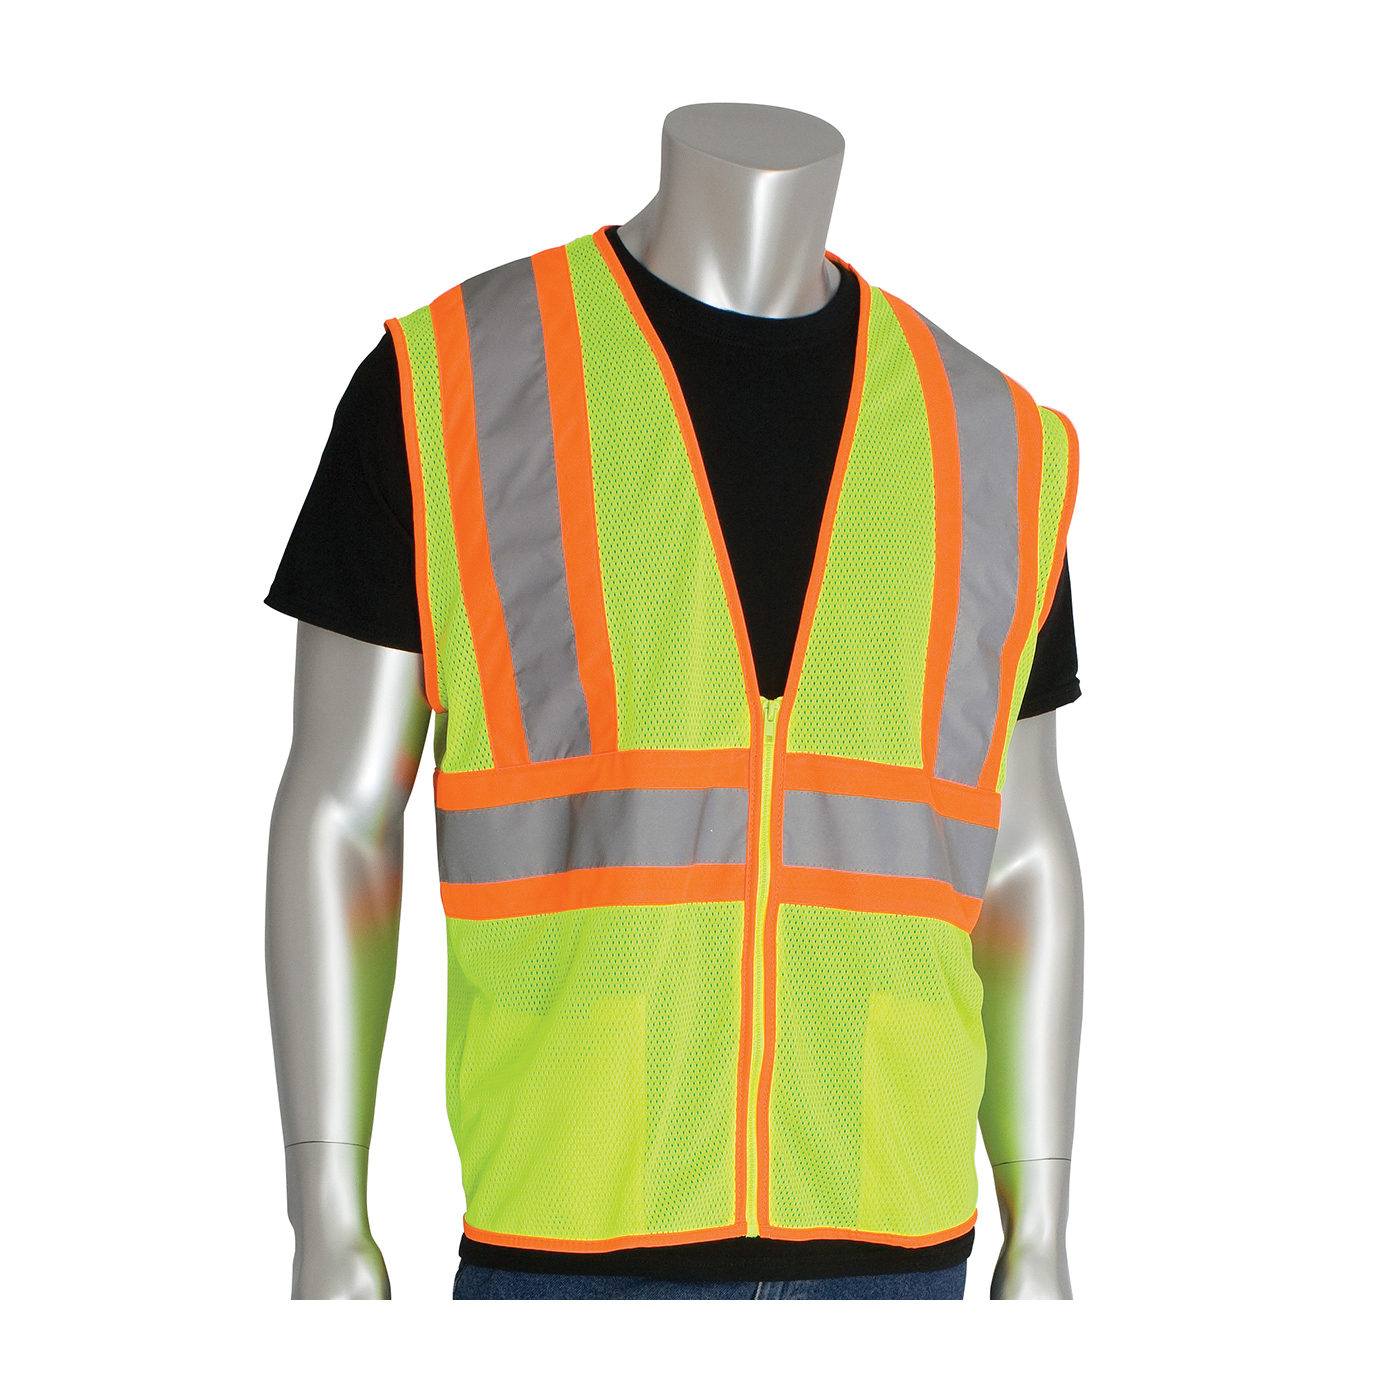 PIP® 302-MVLY 2-Tone Safety Vest, Hi-Viz Lime Yellow, Polyester Mesh, Zipper Closure, 2 Pockets, ANSI Class: Class 2, Specifications Met: ANSI 107 Type R